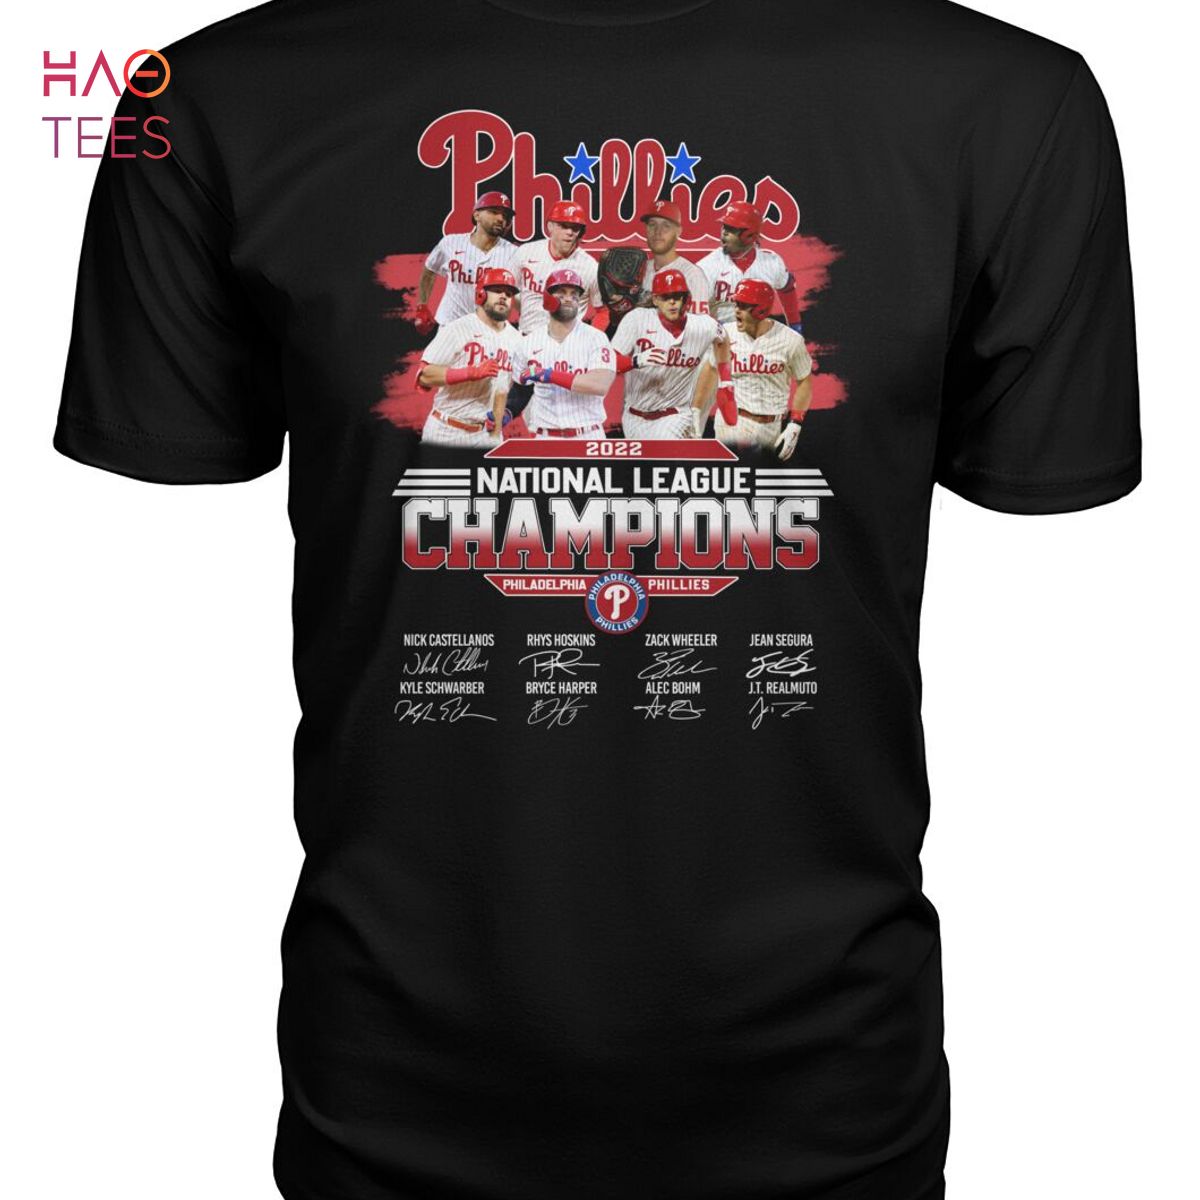 Phillies Champions 2022 Shirt Limited Edition